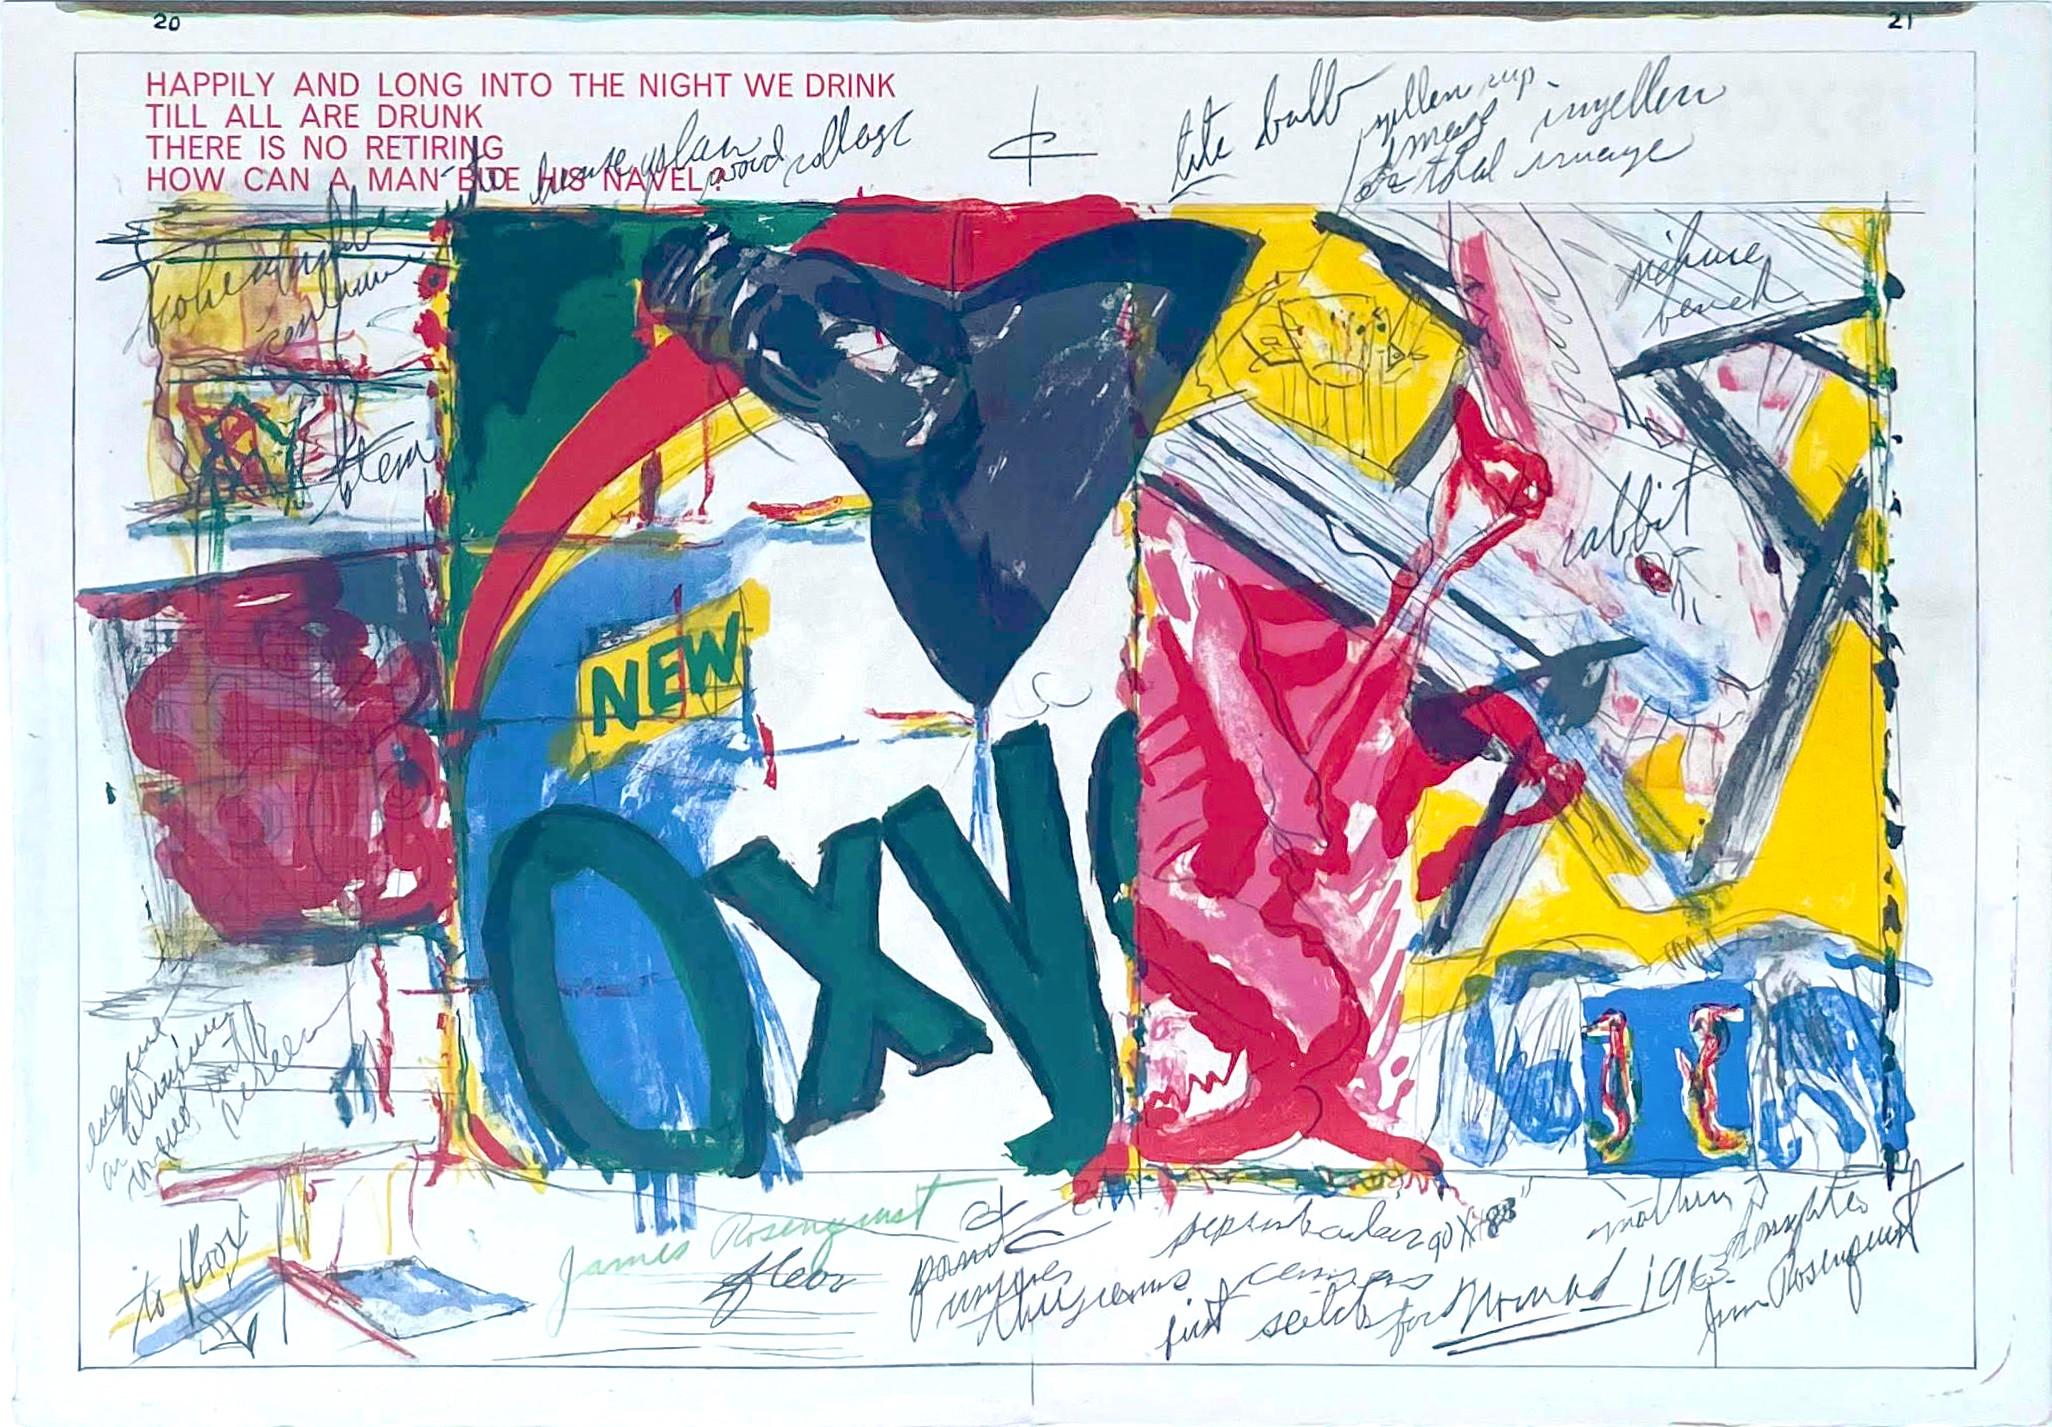 Oxy, Deluxe Signed edition (85/100) of the 1 Cent Life Portfolio, 1960s Pop Art - Print by James Rosenquist